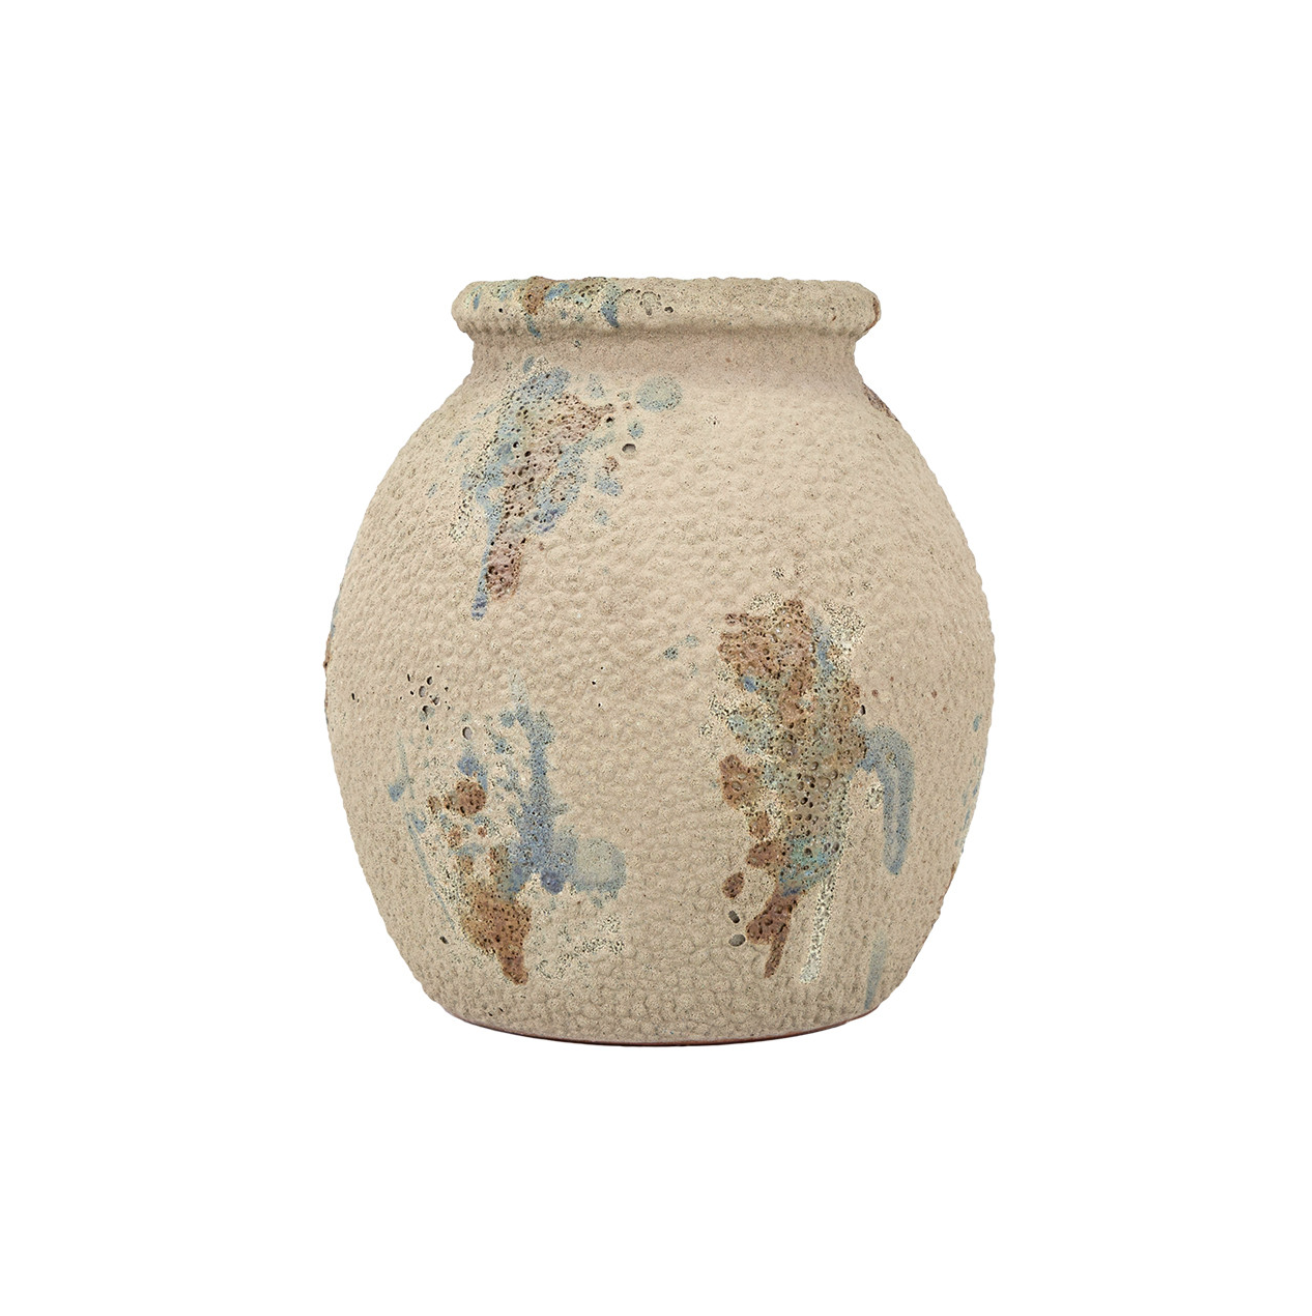 Ancient textured ceramic Colton Vase with patchy blue and rust-colored accents, displayed against a plain white background in a Scottsdale, Arizona bungalow by The Import Collection.